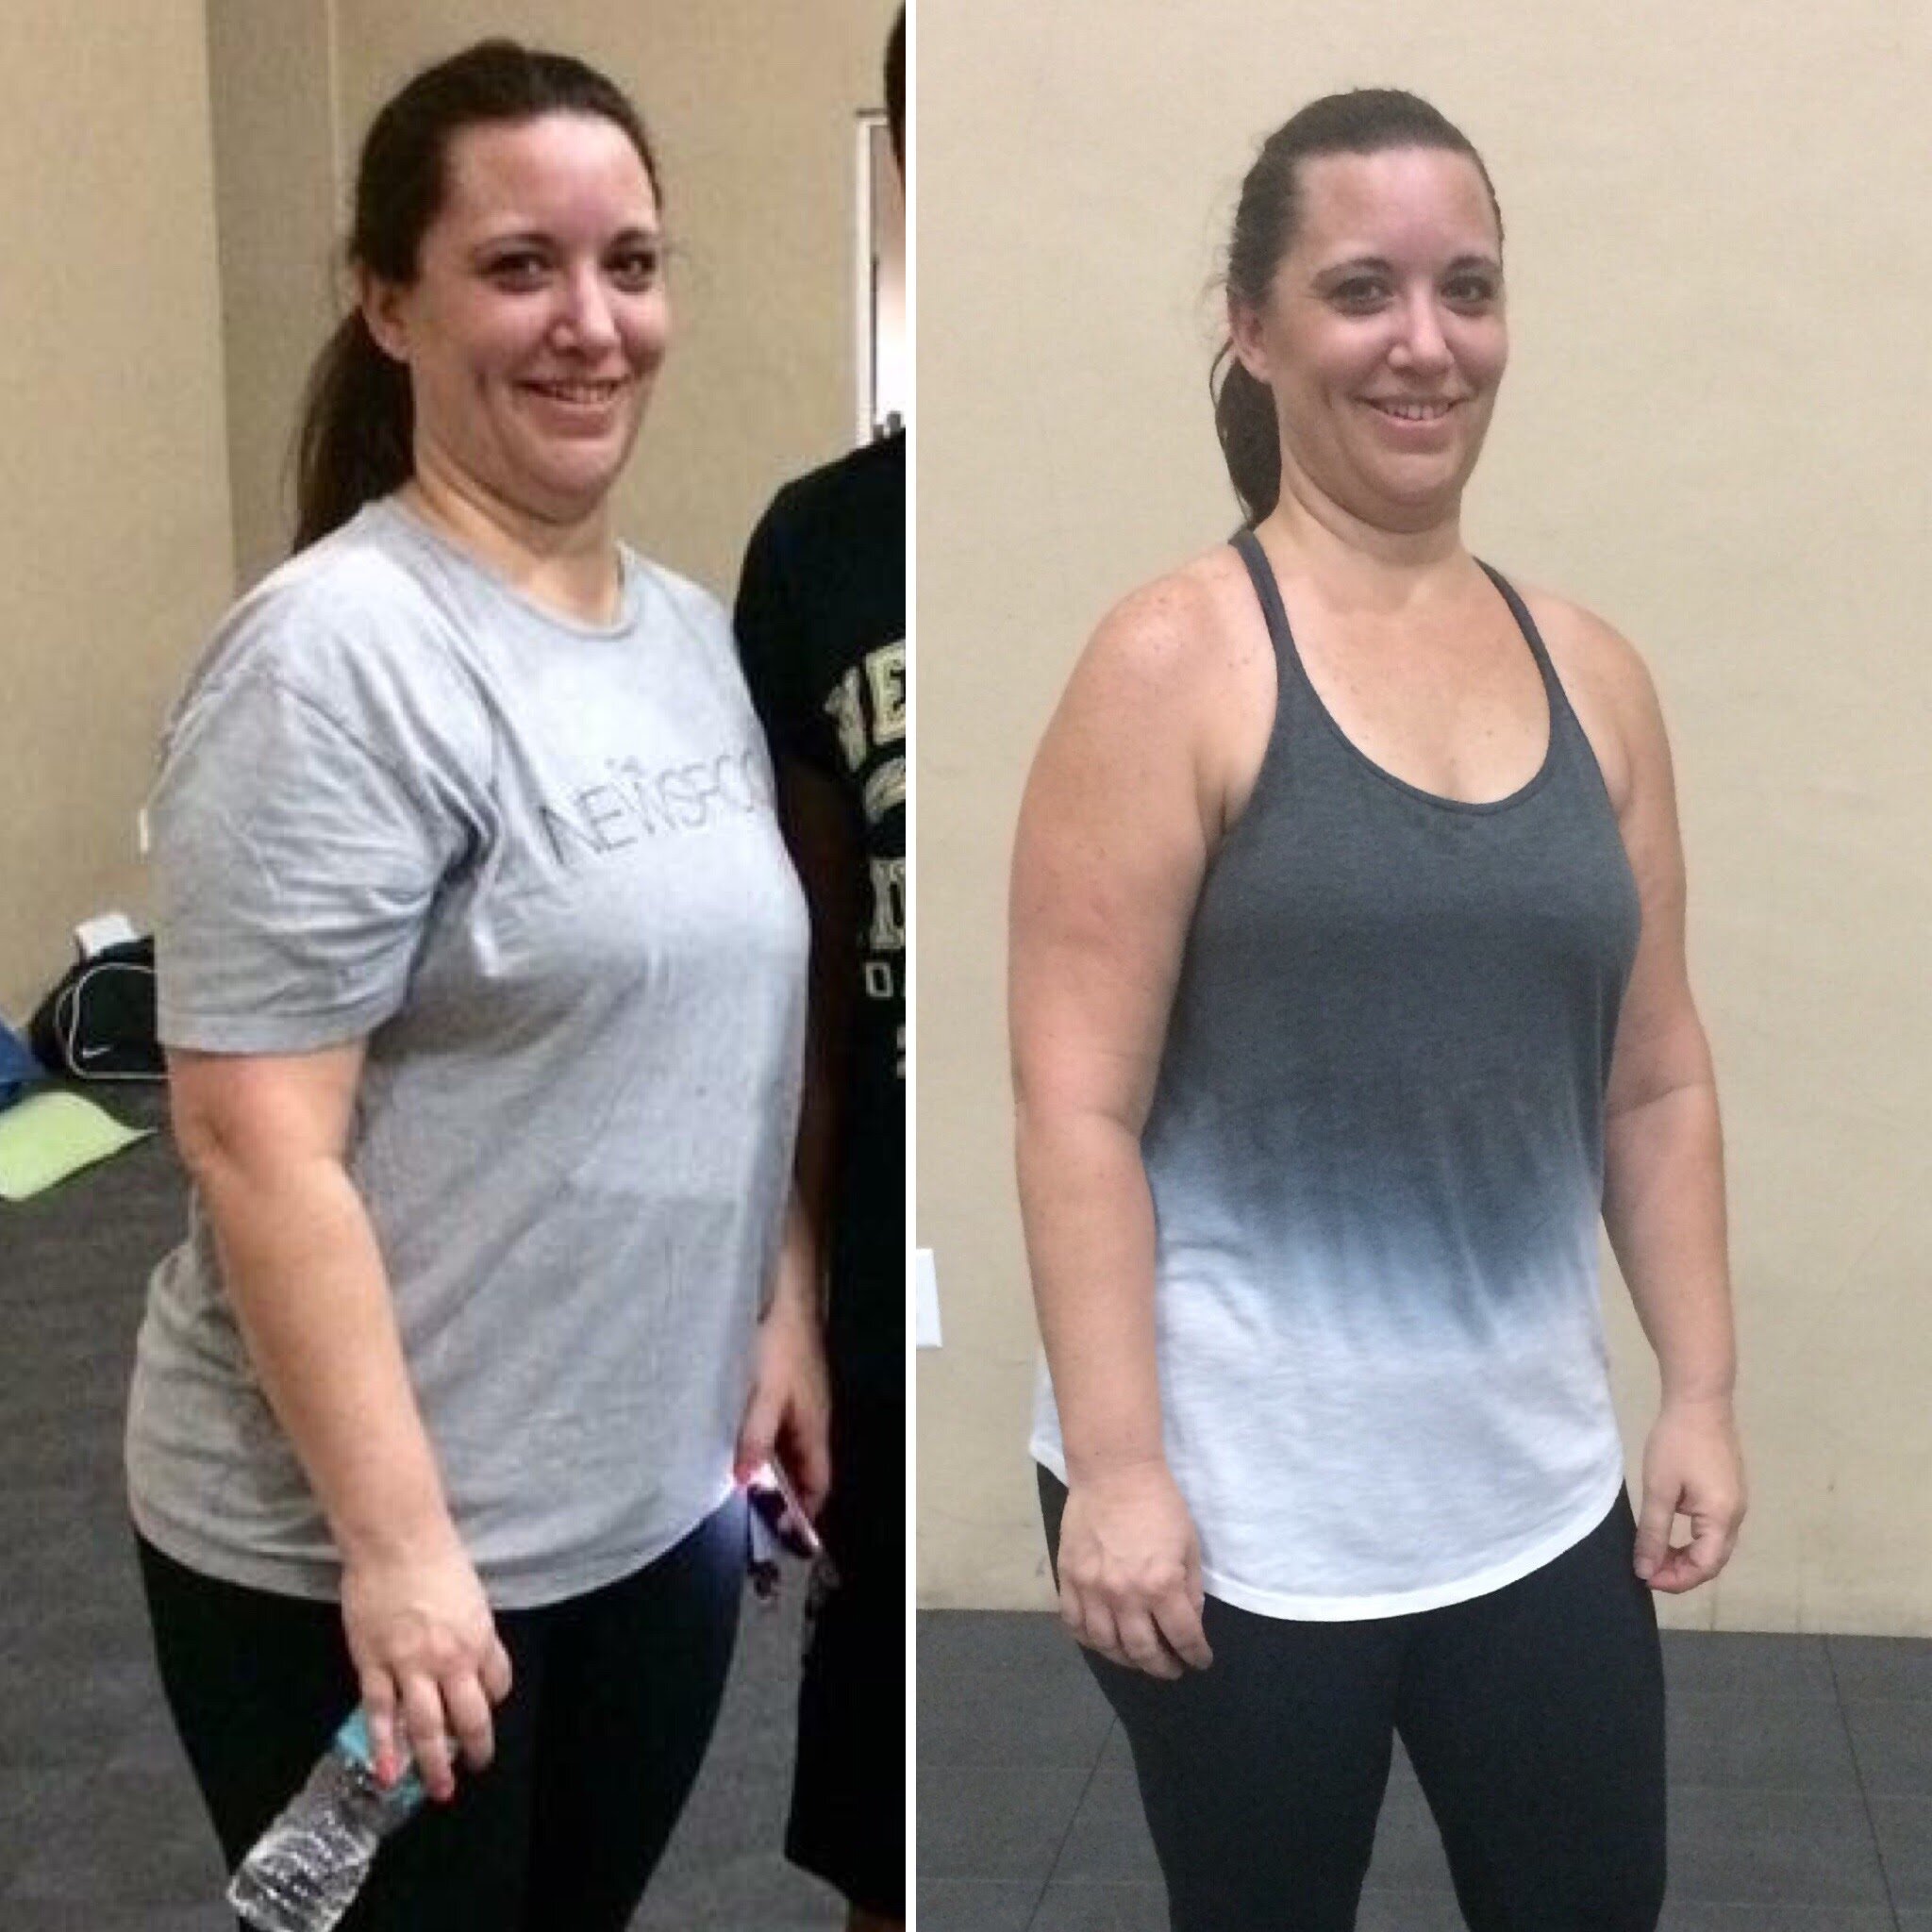 Lisa lost about 20 lbs. working with me in about 3 months.jpg